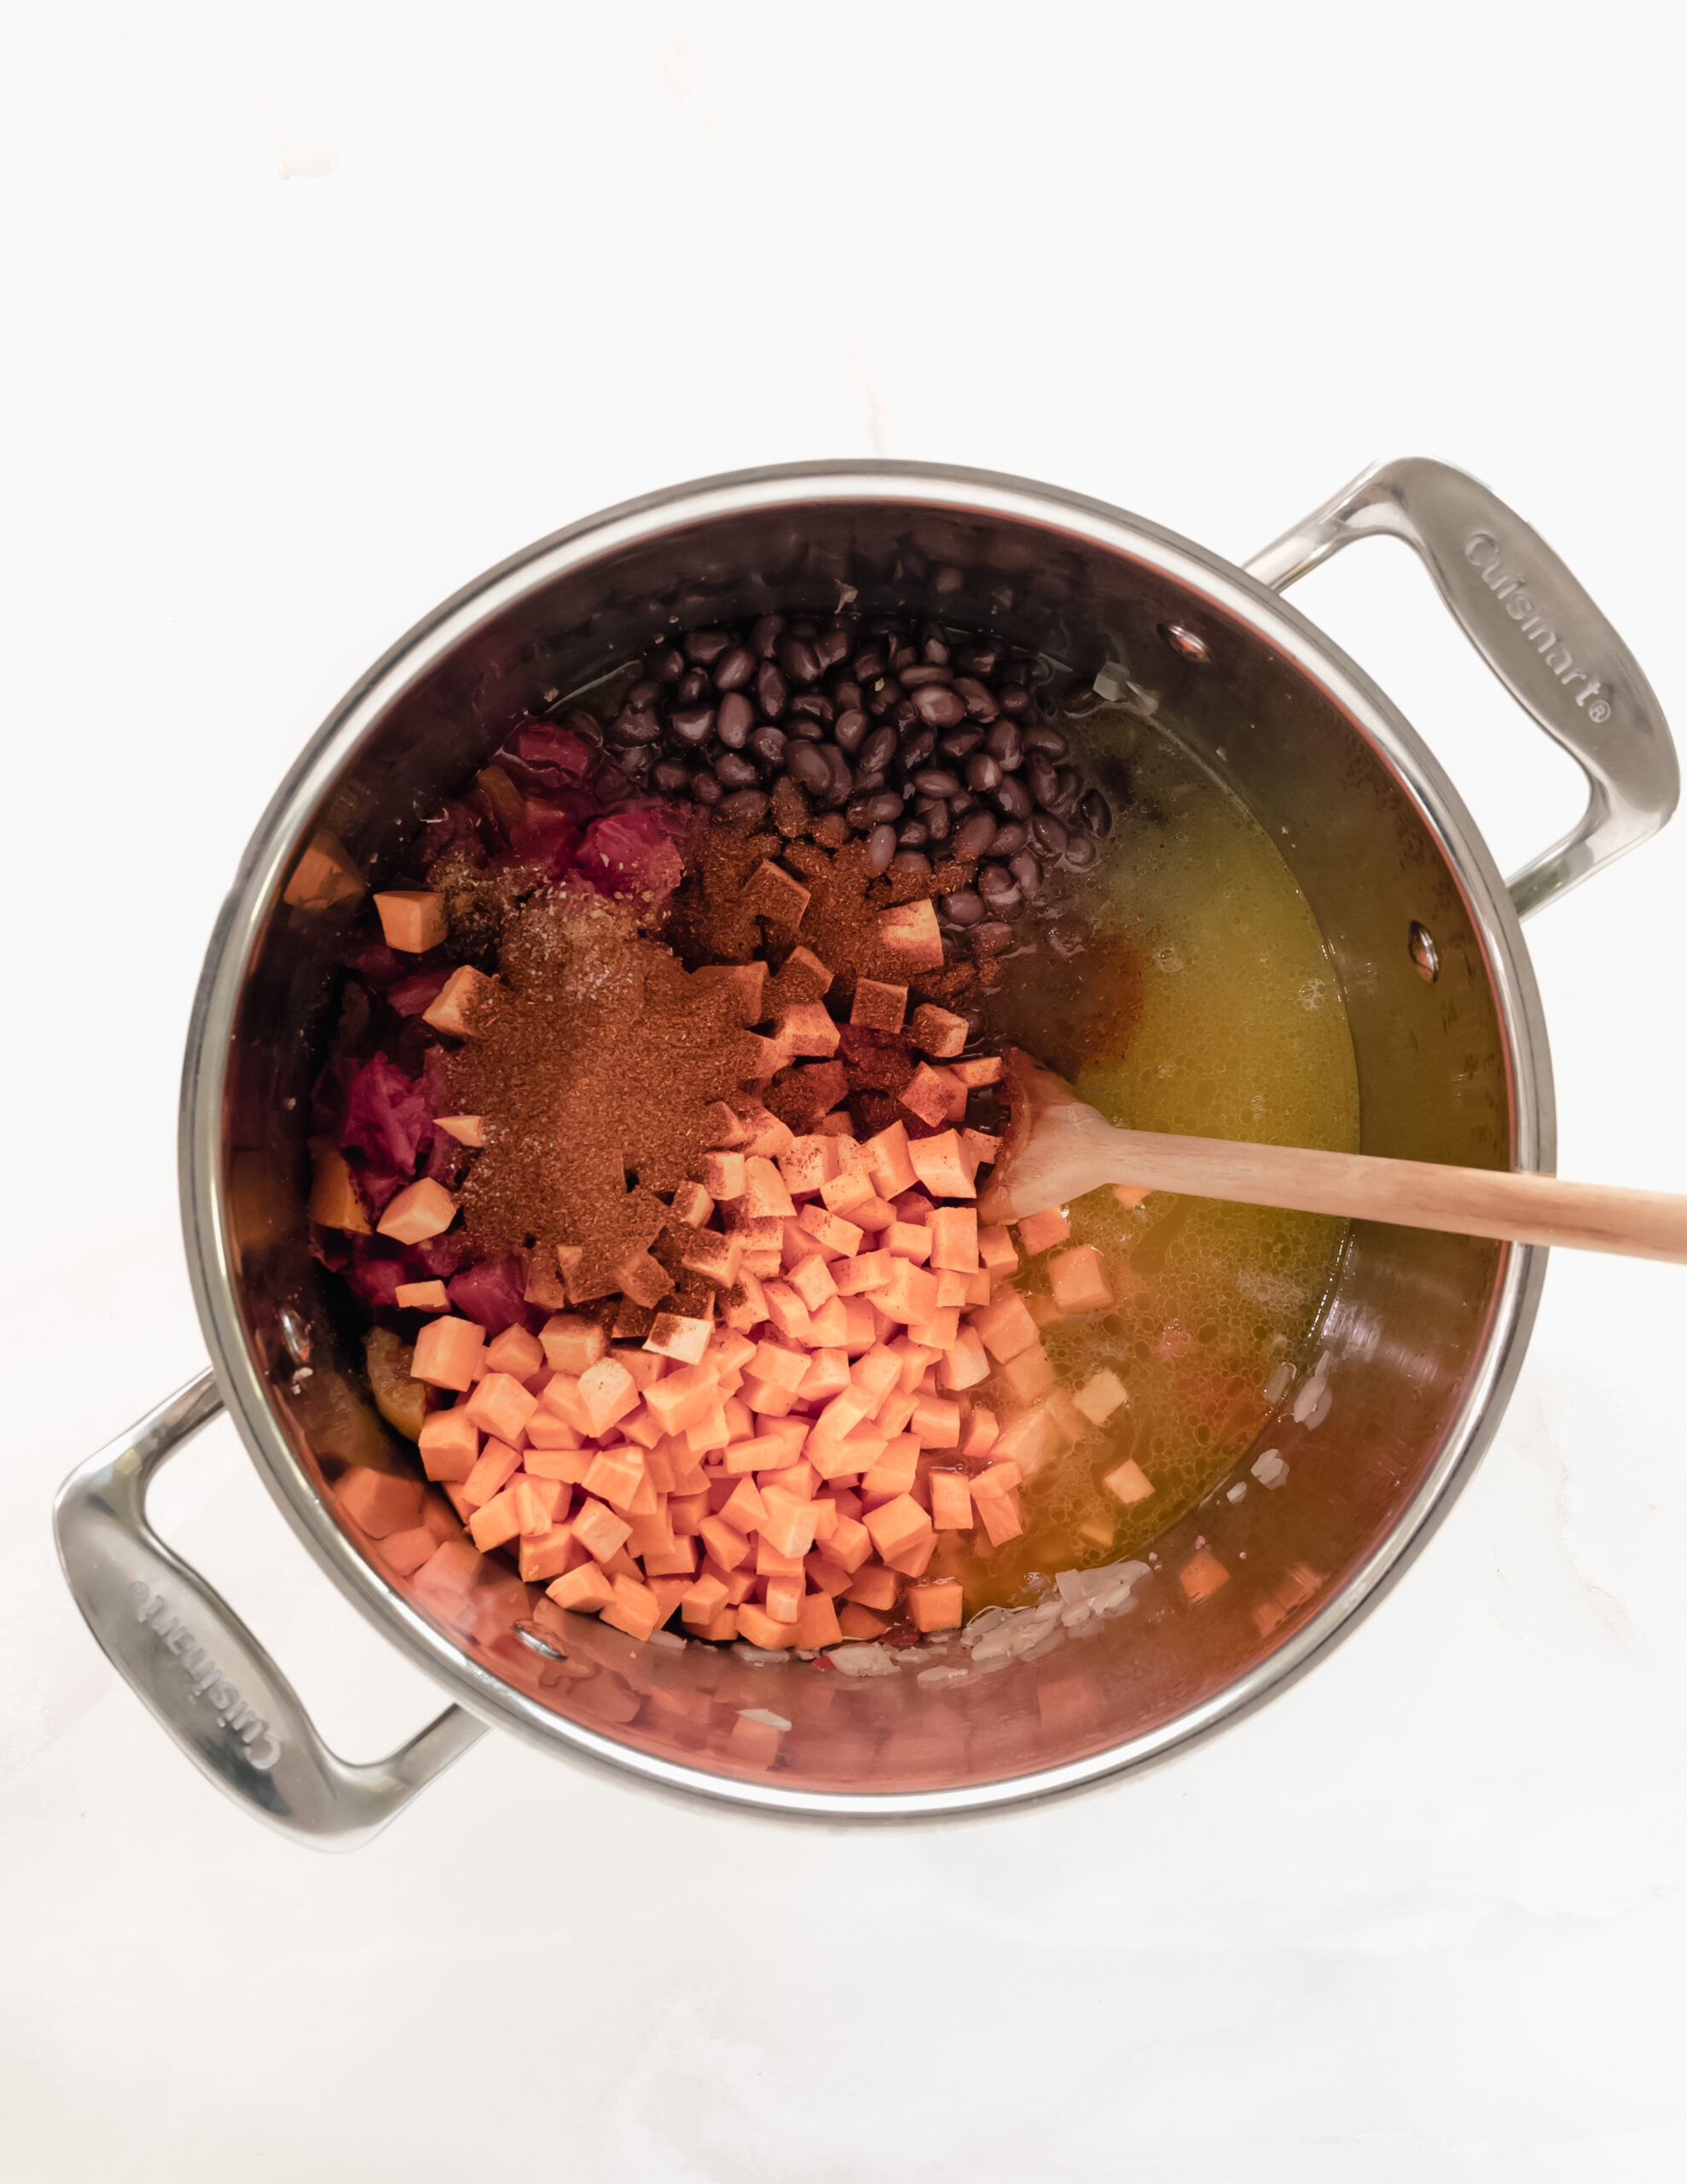 Large stainless steel pot in sweet potatoes, black beans, spices, ground beef, and tomatoes, stirred with a wooden spoon.